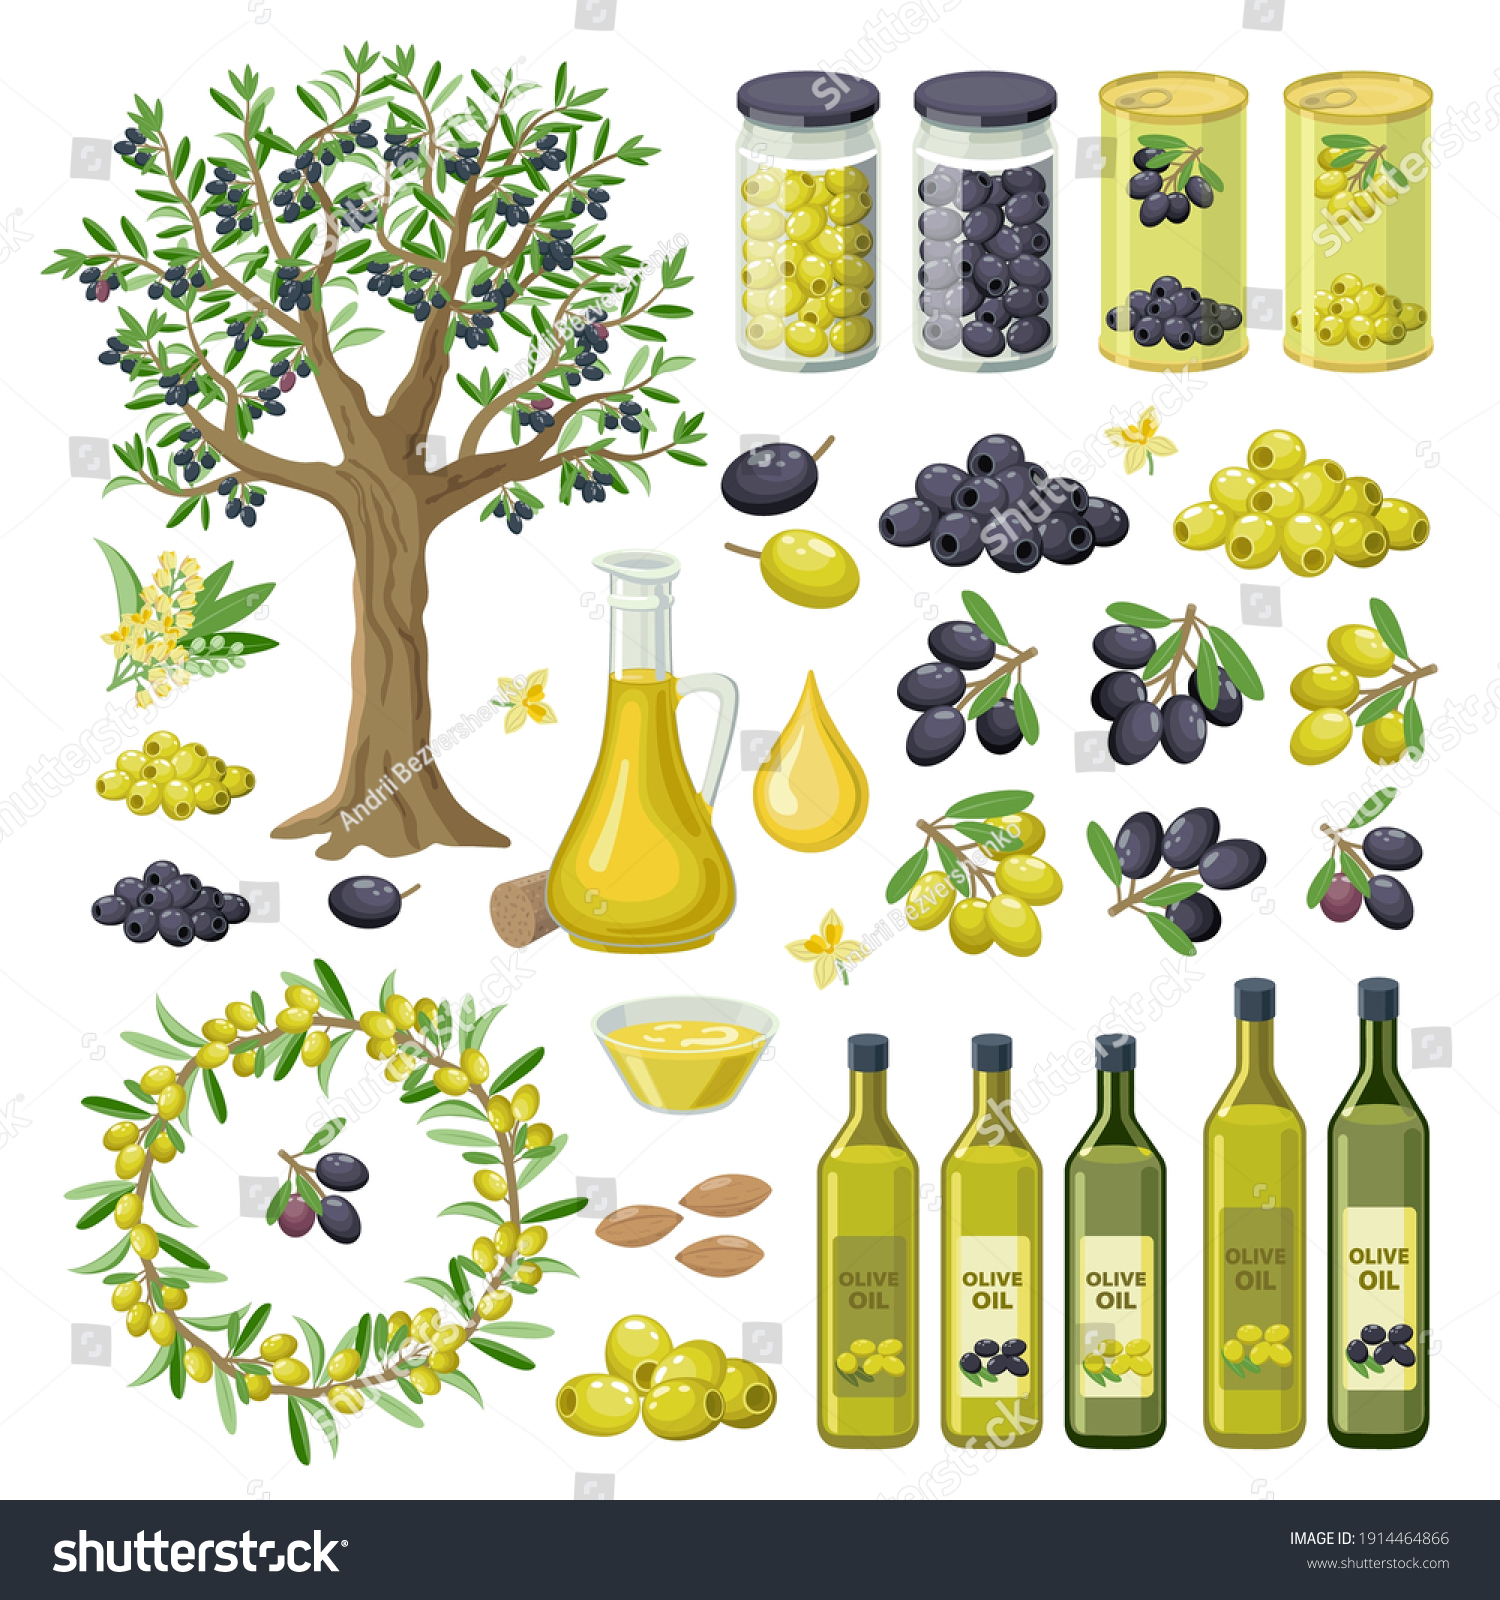 Large collection of olives food, products, olive oil bottles, olive tree,  groups of black and green olives, canned, pickled, branches and leaves. Olives infographic elements isolated on white. #1914464866